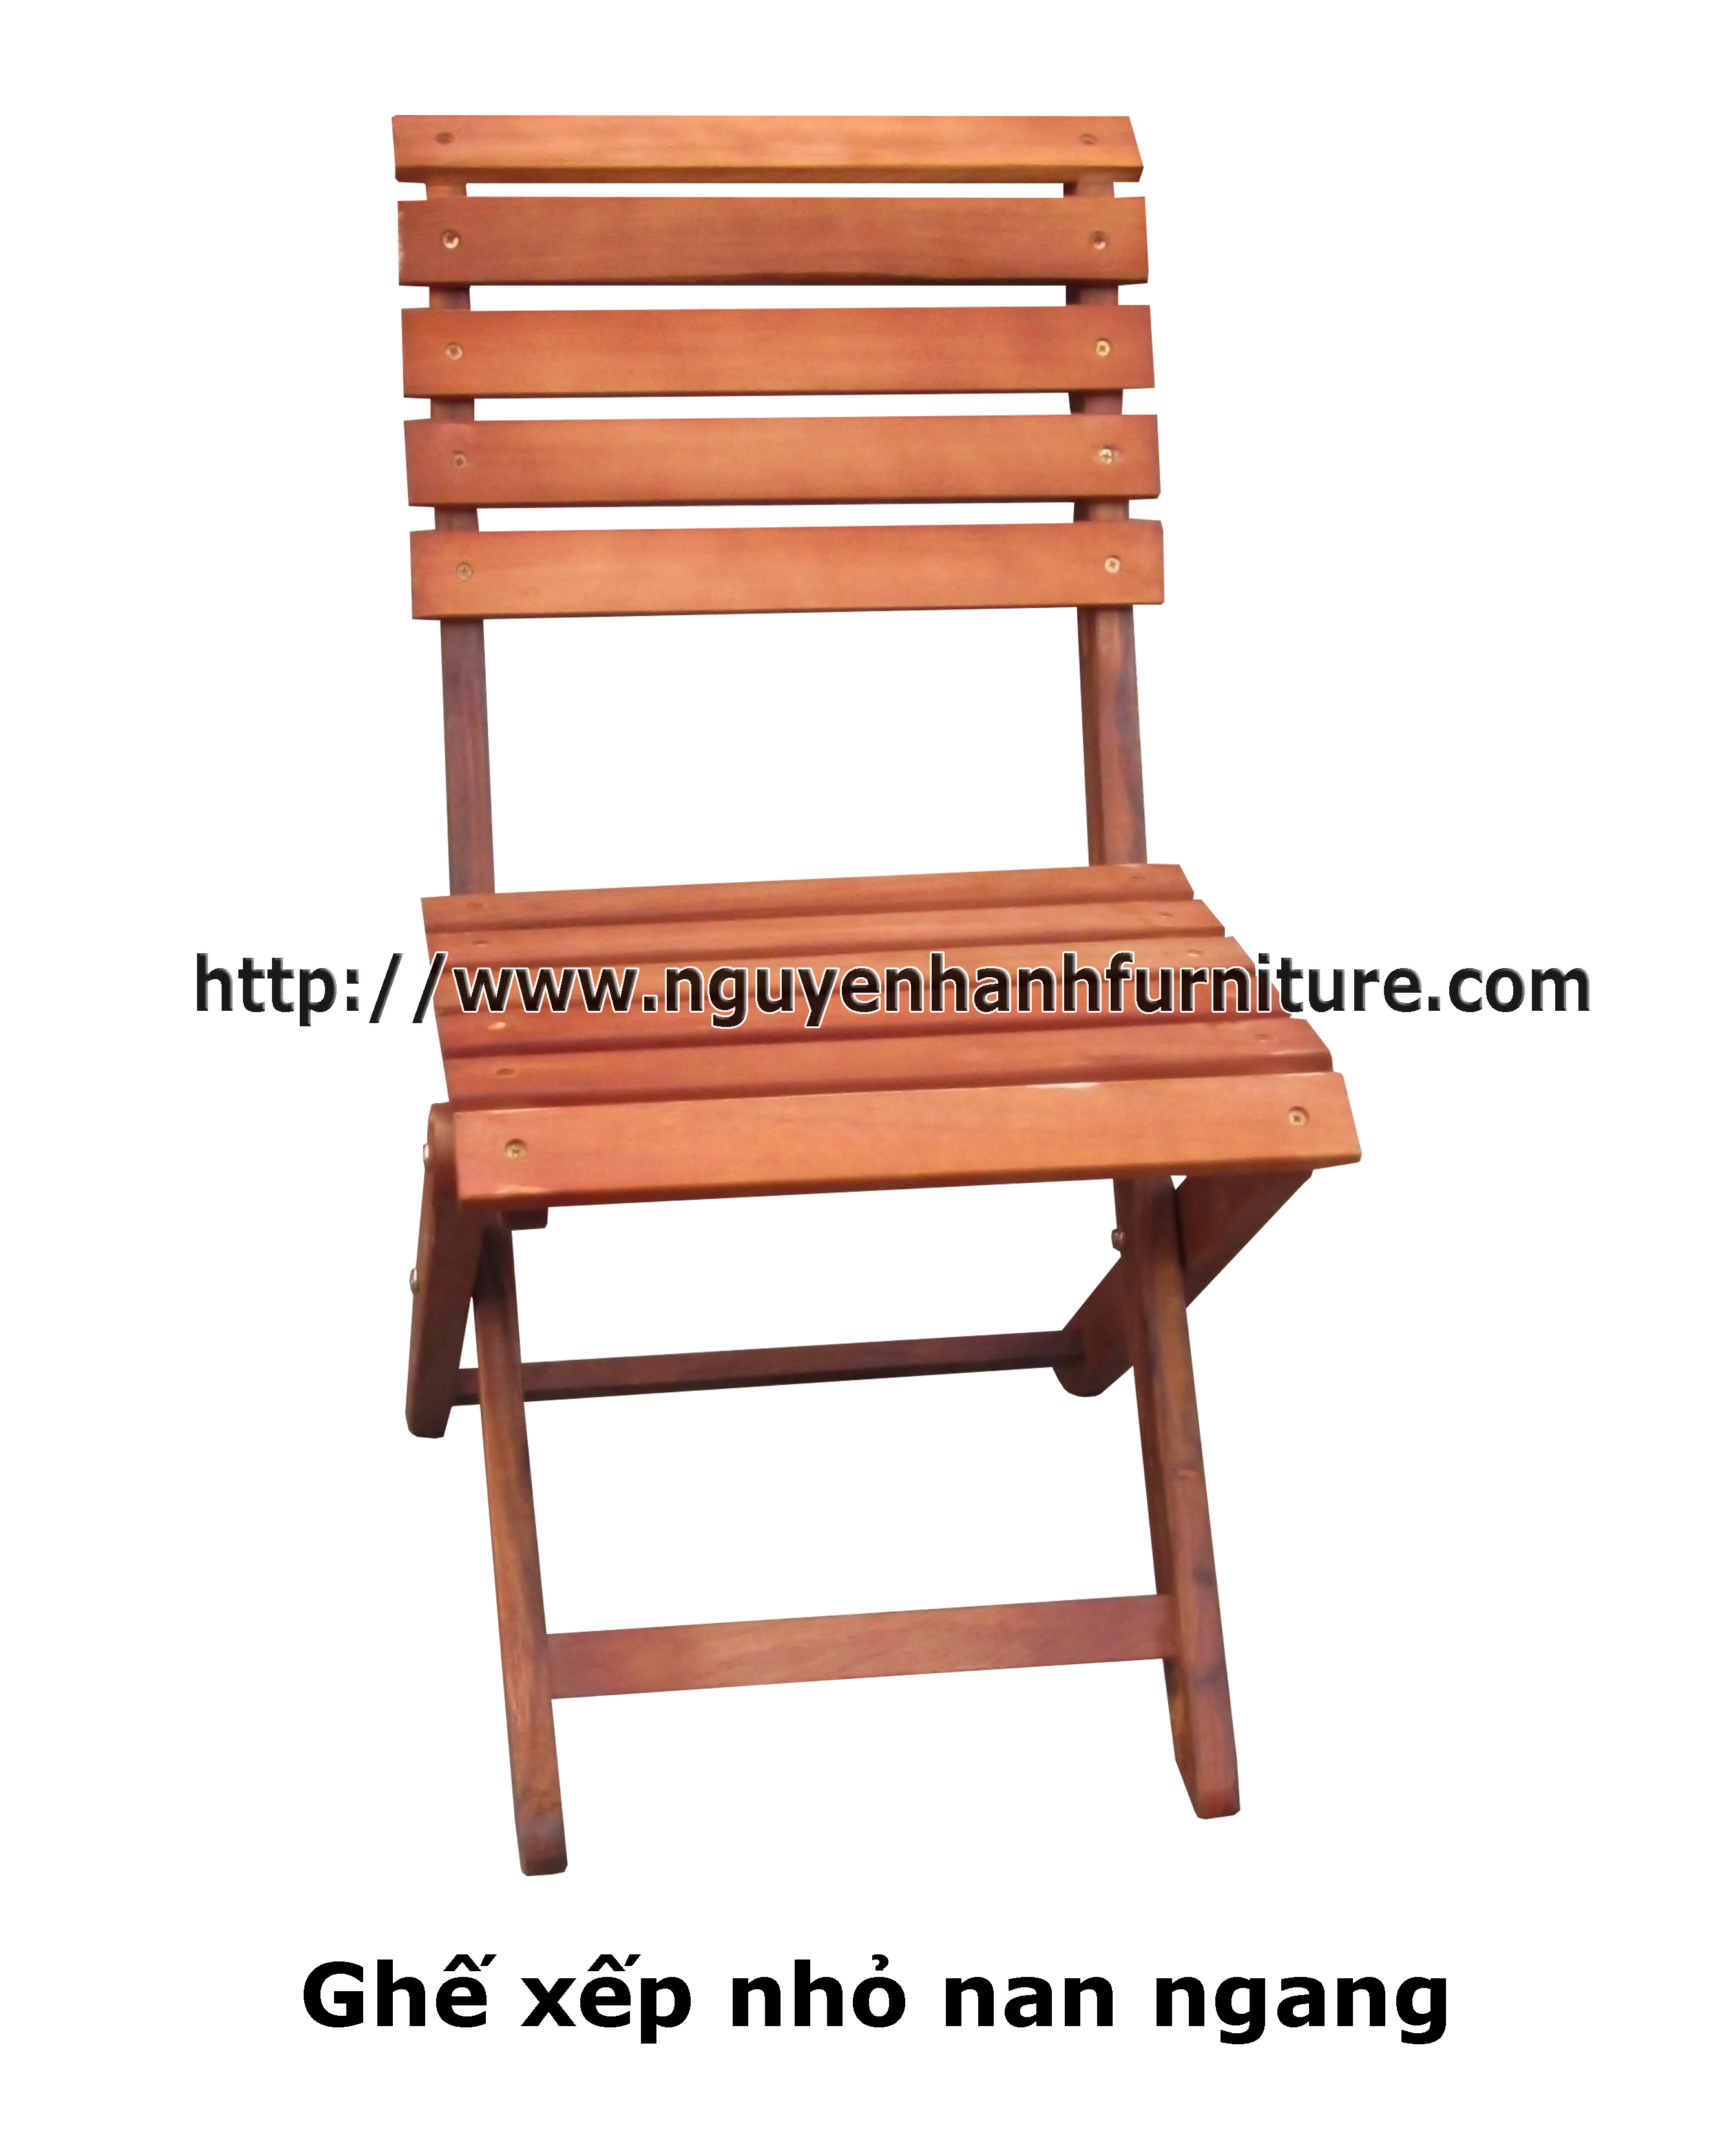 Name product: Small chair (new) - Description: Eucalyptus wood 